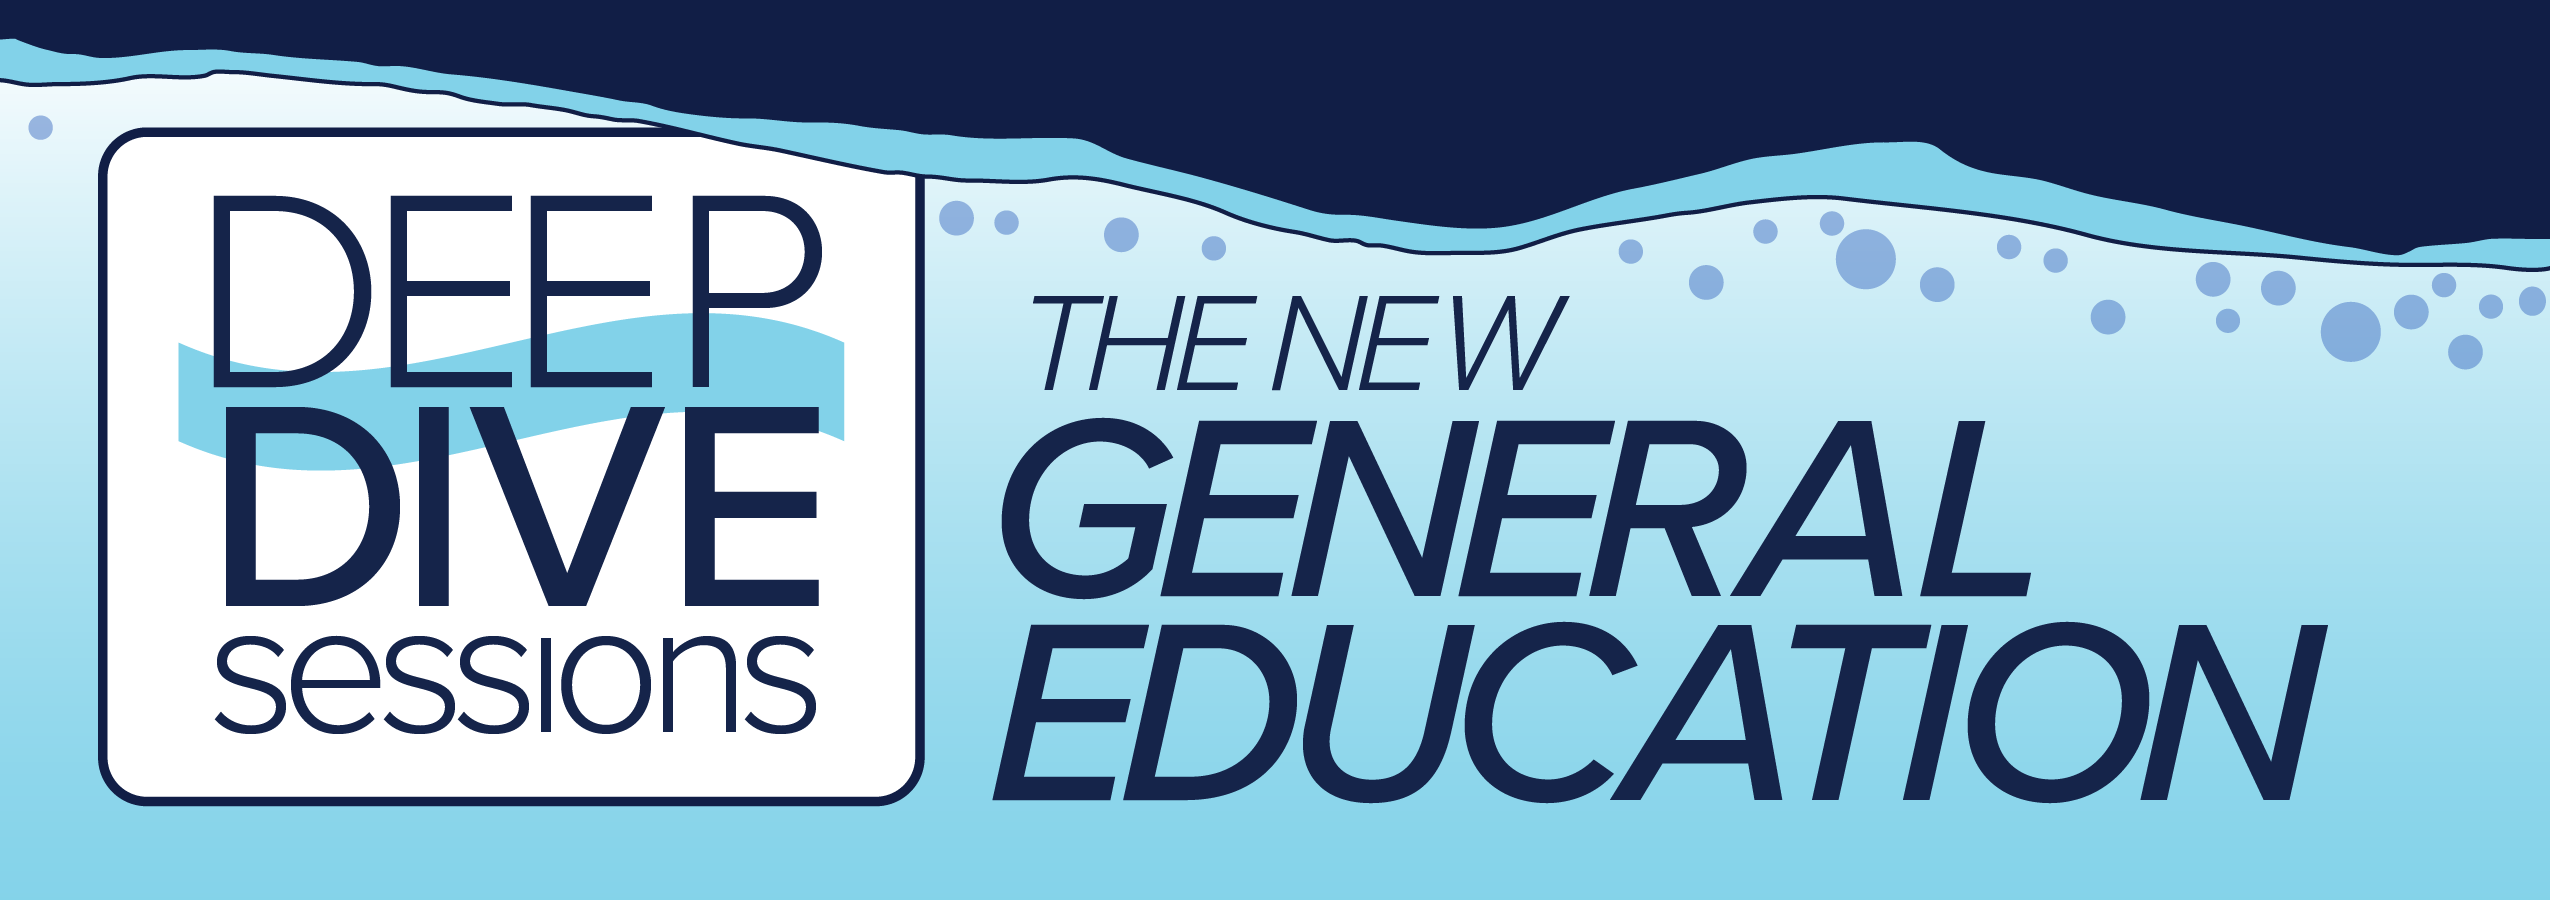 Deep Dive Sessions about the new General Education